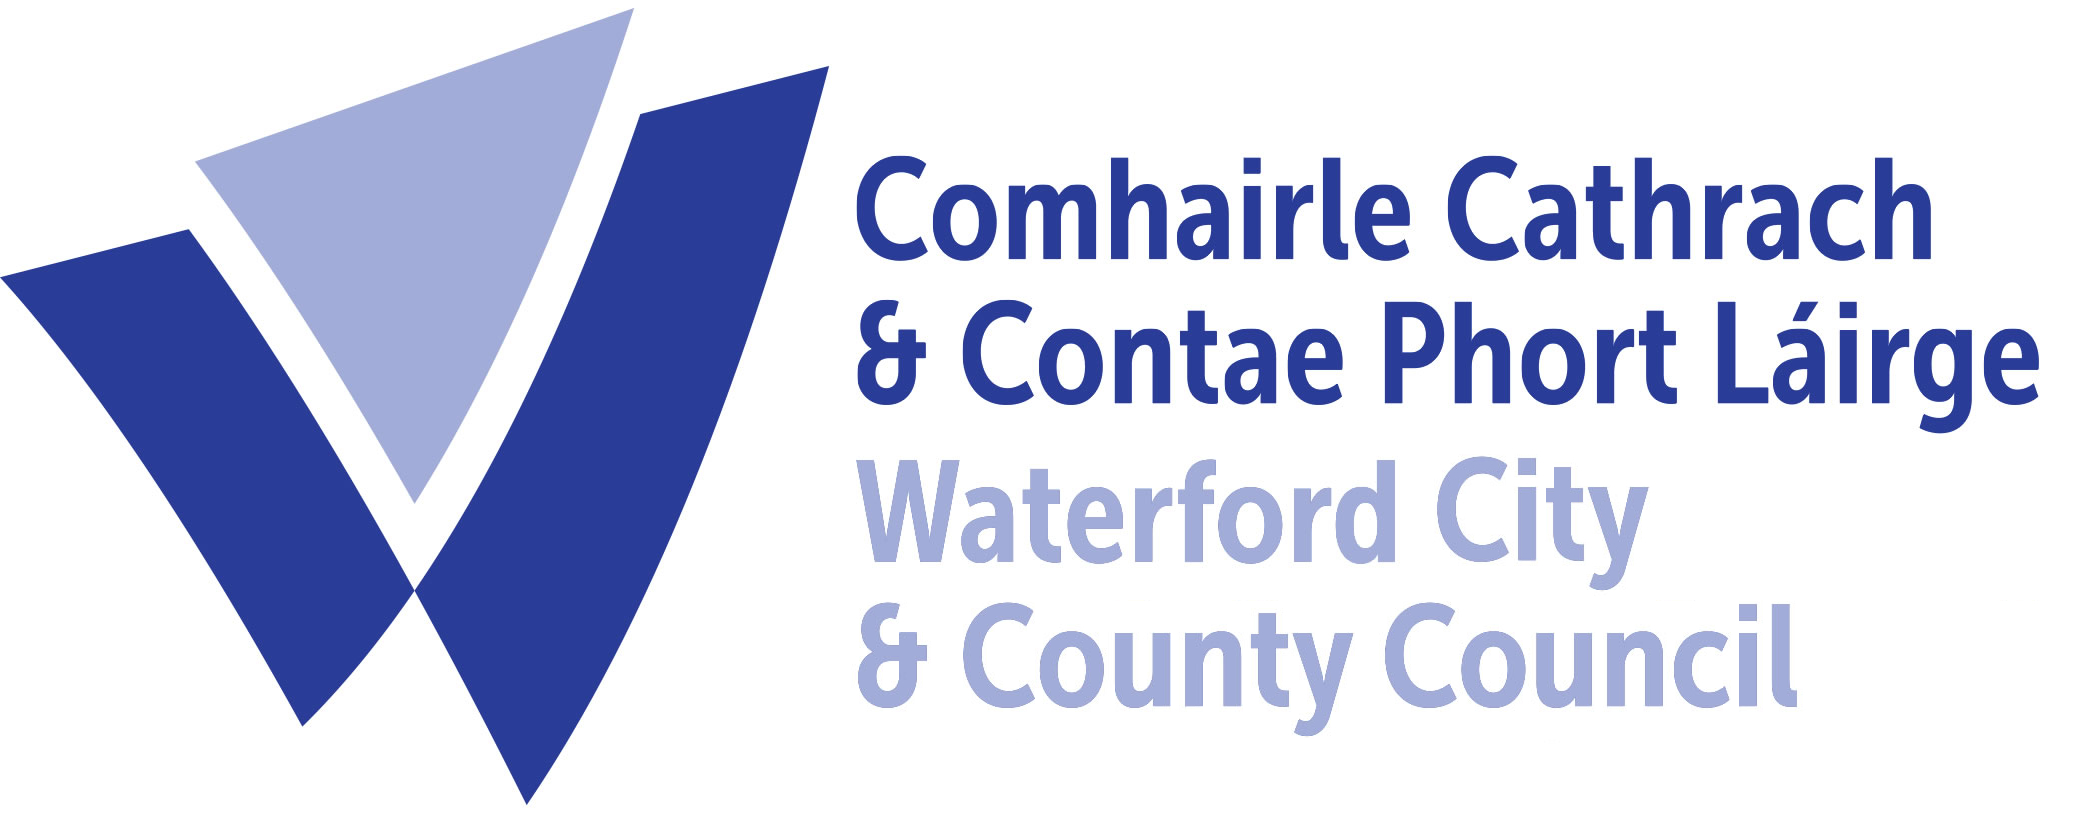 Waterford City & County Council logo